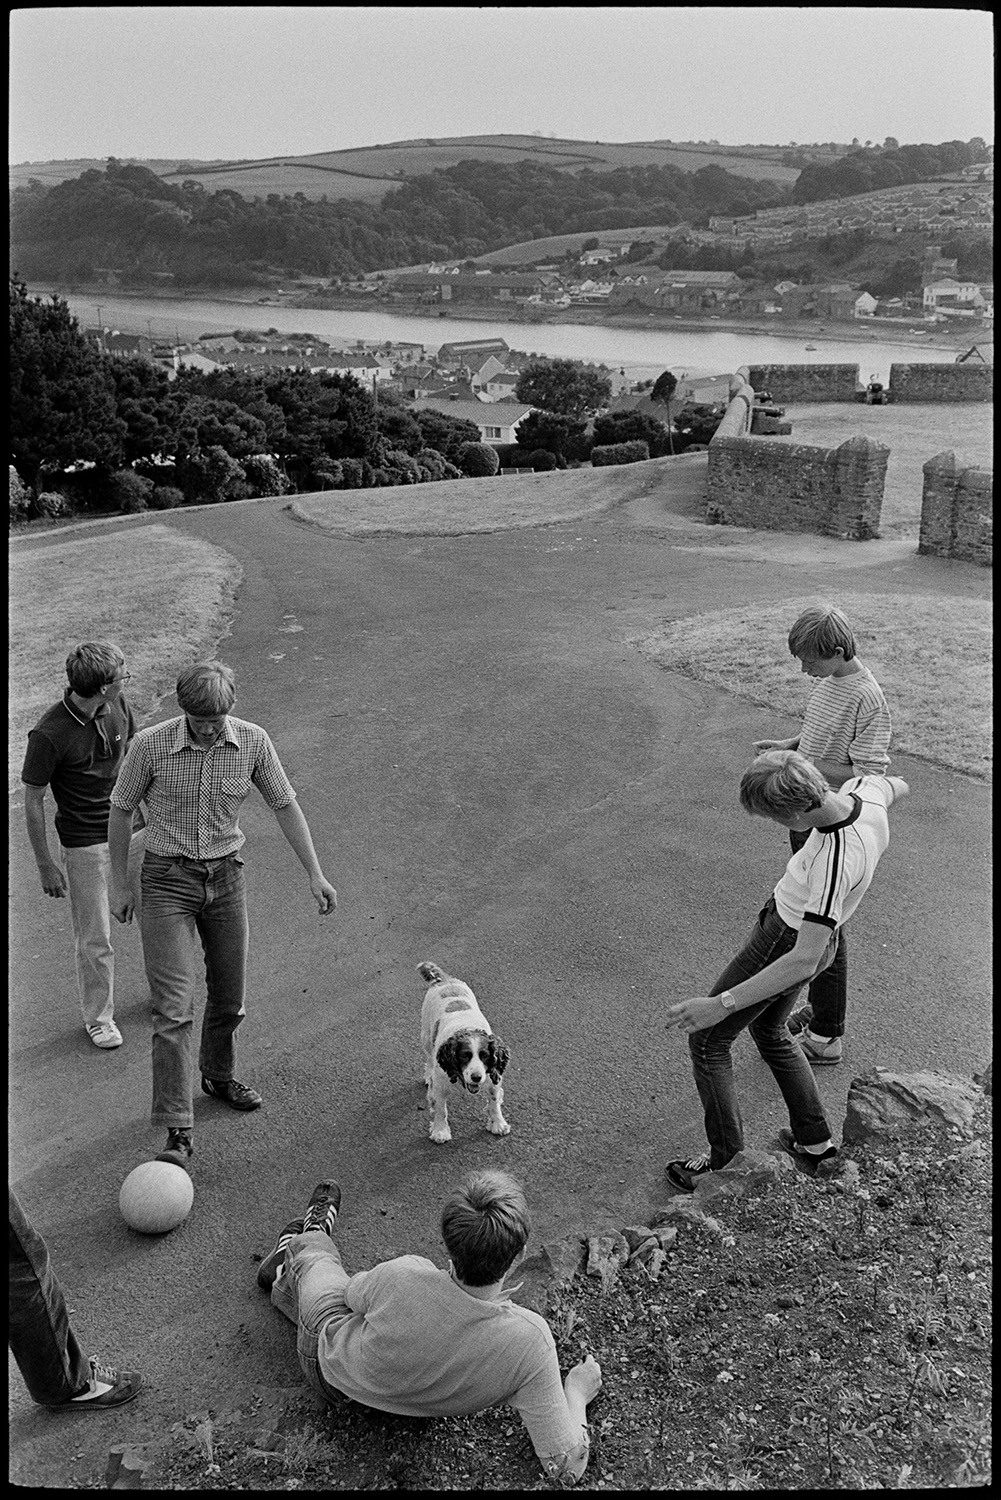 Youths playing football, swings in park, with dog. 
[Young men and boys playing football at Chudleigh Fort overlooking the River Torridge and Bideford. A dog is with them.]